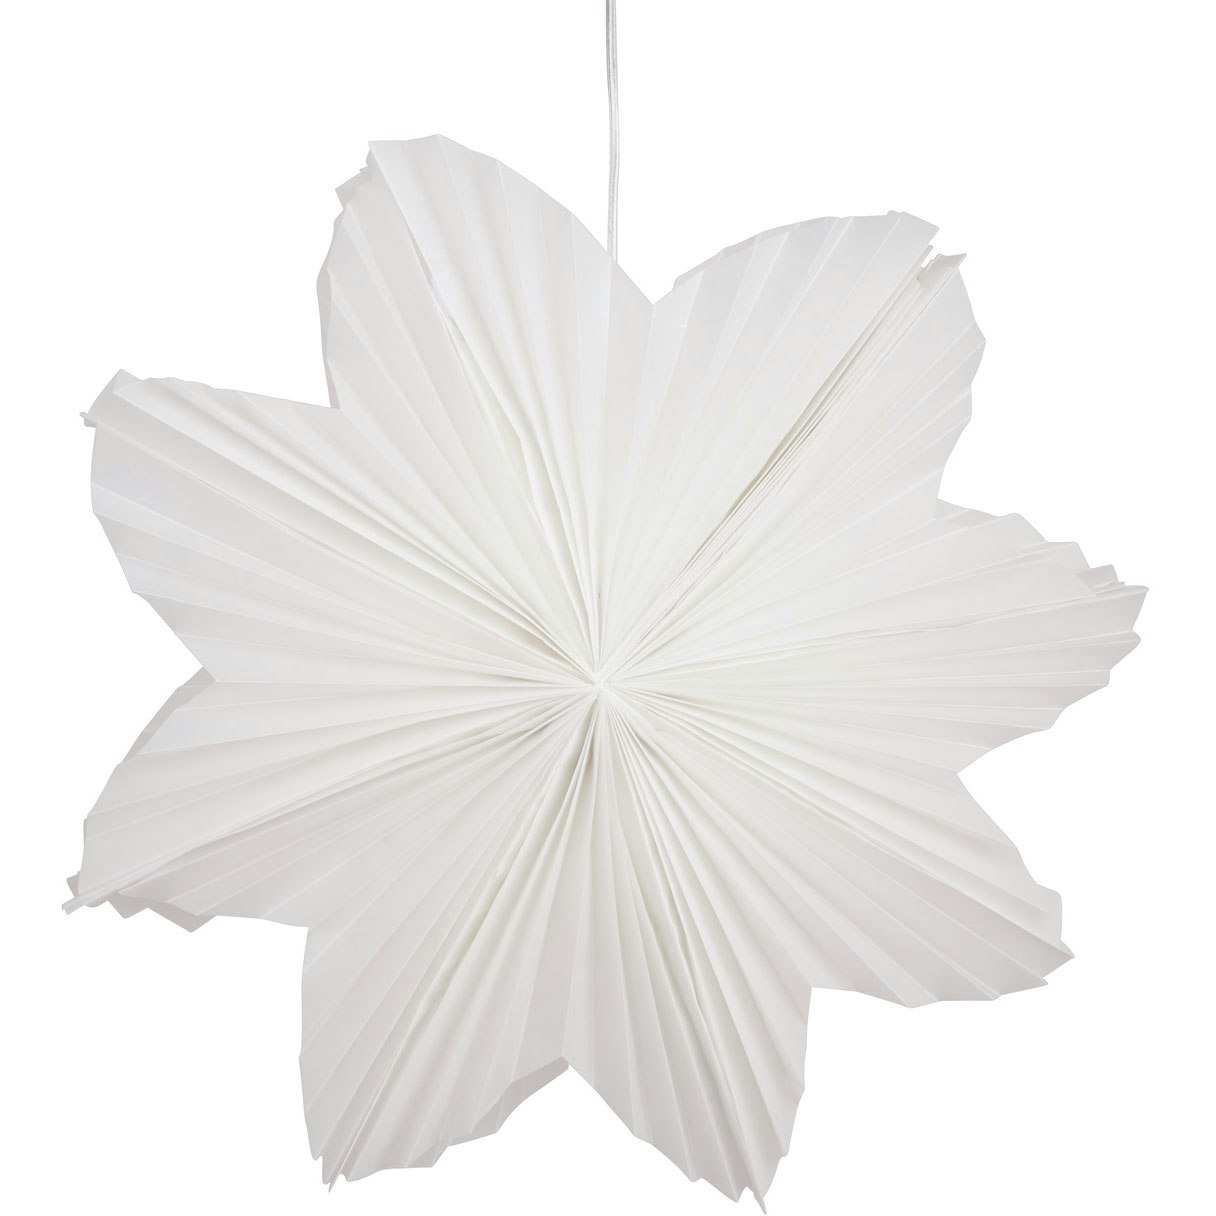 Daisy Kerstster 60 cm, Wit